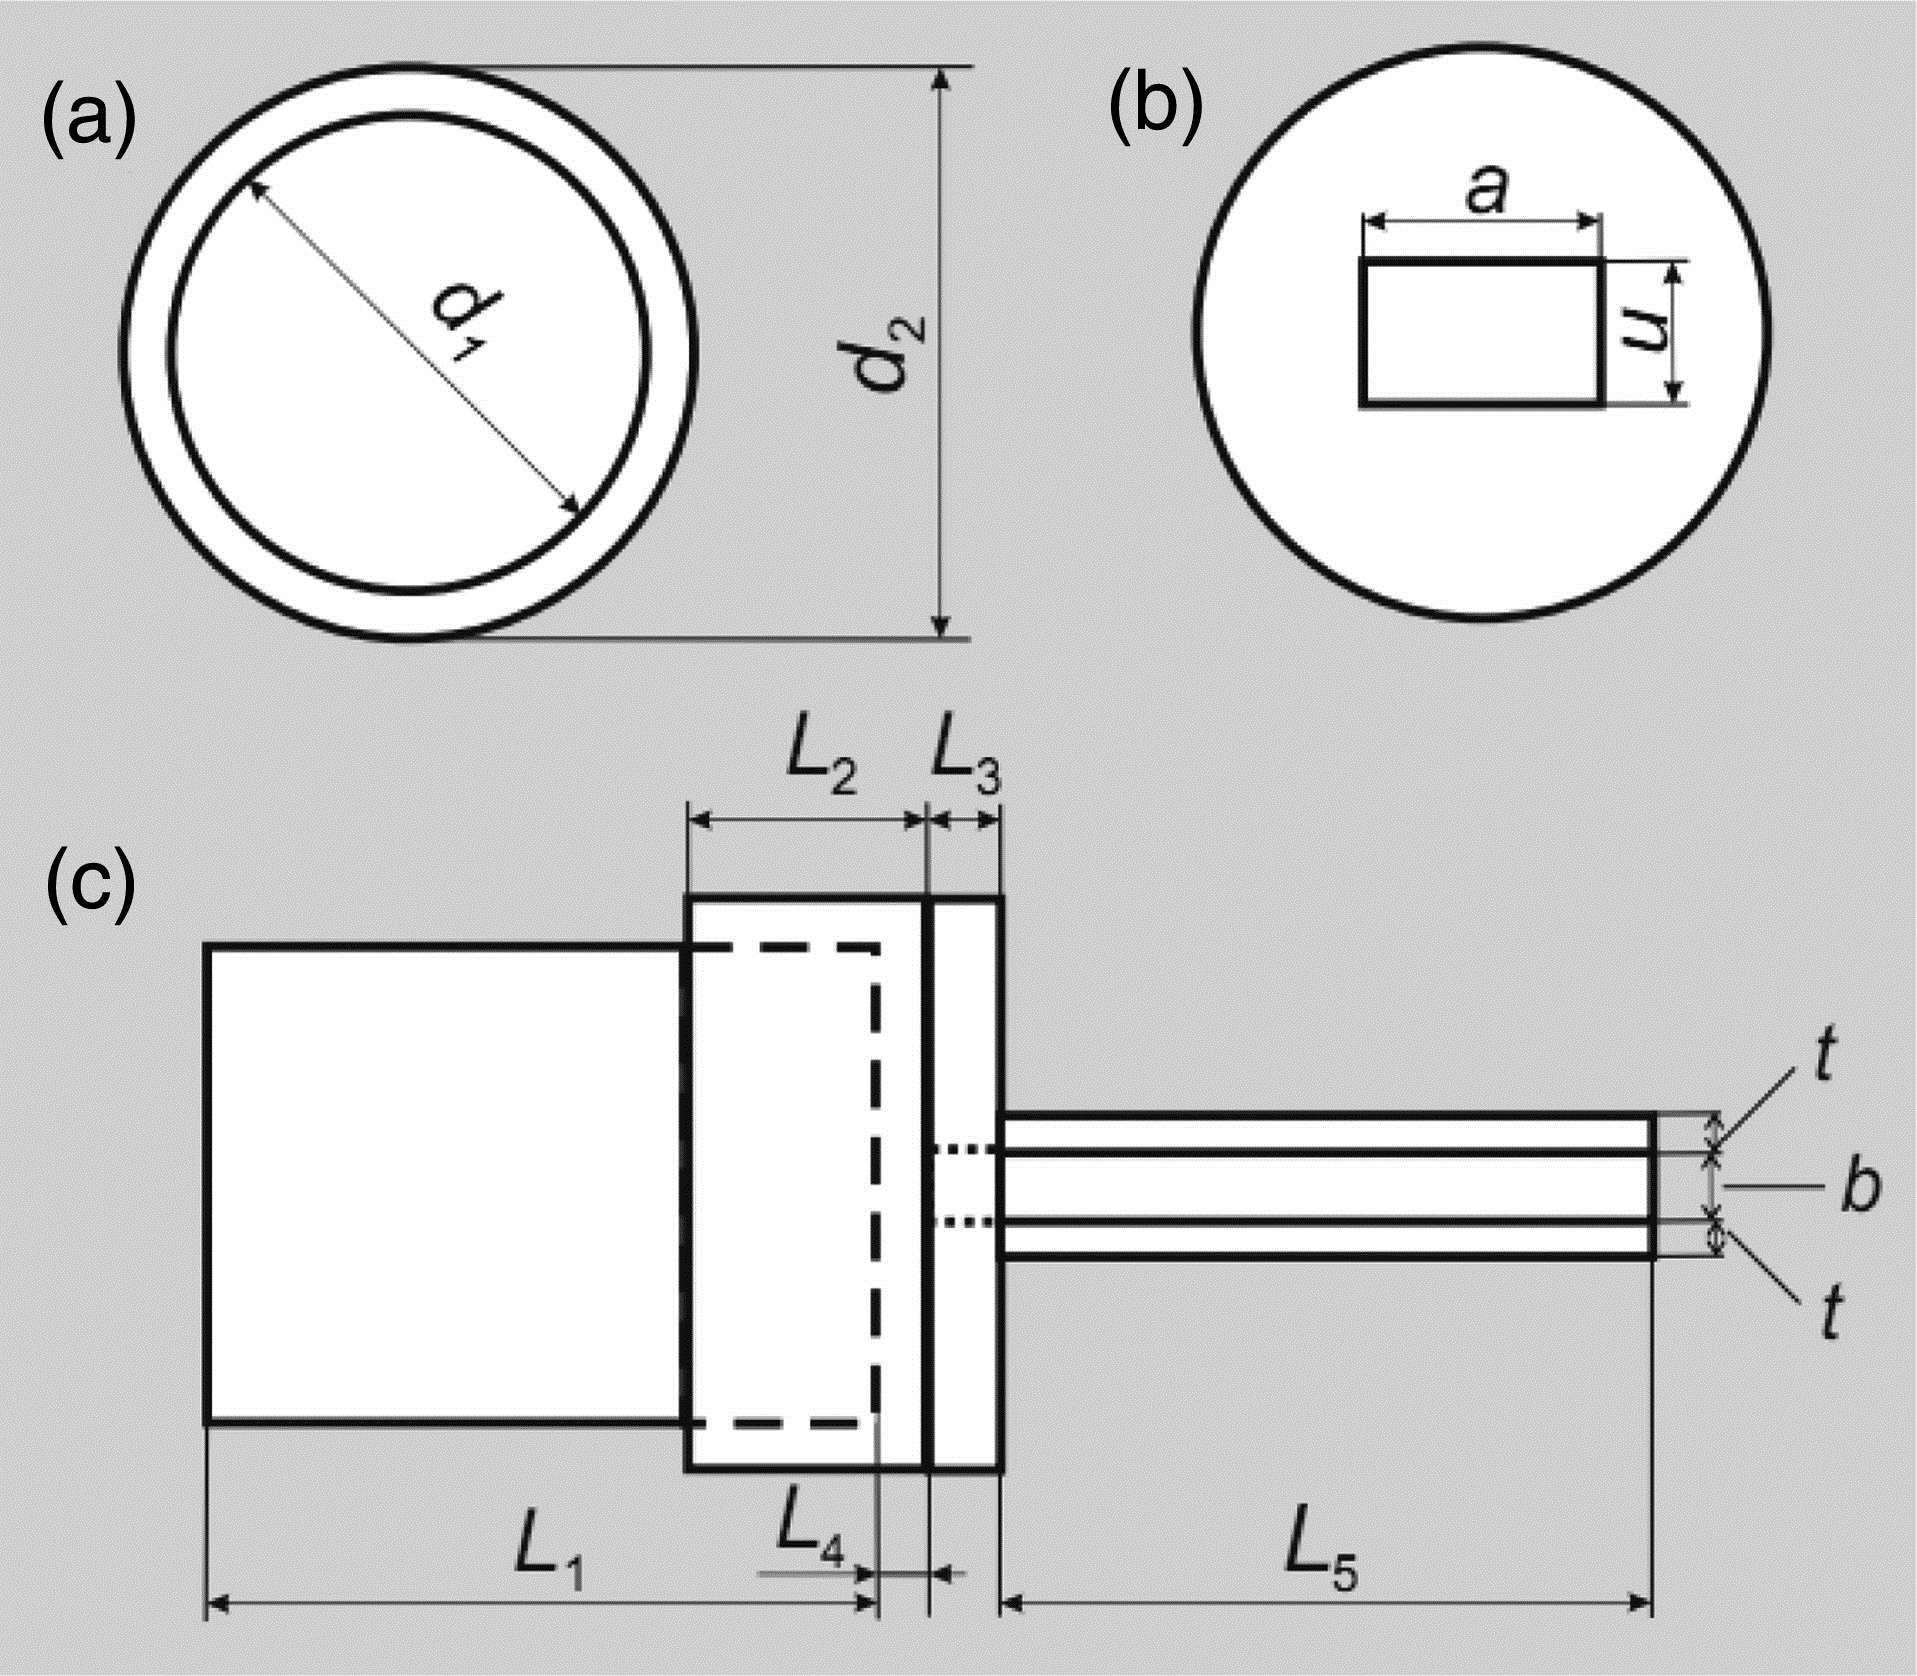 Schematic representation of the connector design: (a) view from the excitation area, (b) view from the PH, and (c) longitudinal view. d1 is a diameter of the optical fiber, and thus the inner diameter of the tumbler; d2 is the external diameter of the tumbler, and thus the diameter of the Al screen; a and u are the width and height of the PH, respectively; L1 is the length of the optical fiber; L2 is the length of the tumbler; L3 is the thickness of the Al screen; L4 is the distance between the optical fiber and Al screen, that is, the thickness of the tumbler bottom; L5 is the length of the MIM waveguide; b is the thickness of the MIM waveguide dielectric layer; t is the thickness of the MIM waveguide’s metallic coatings.